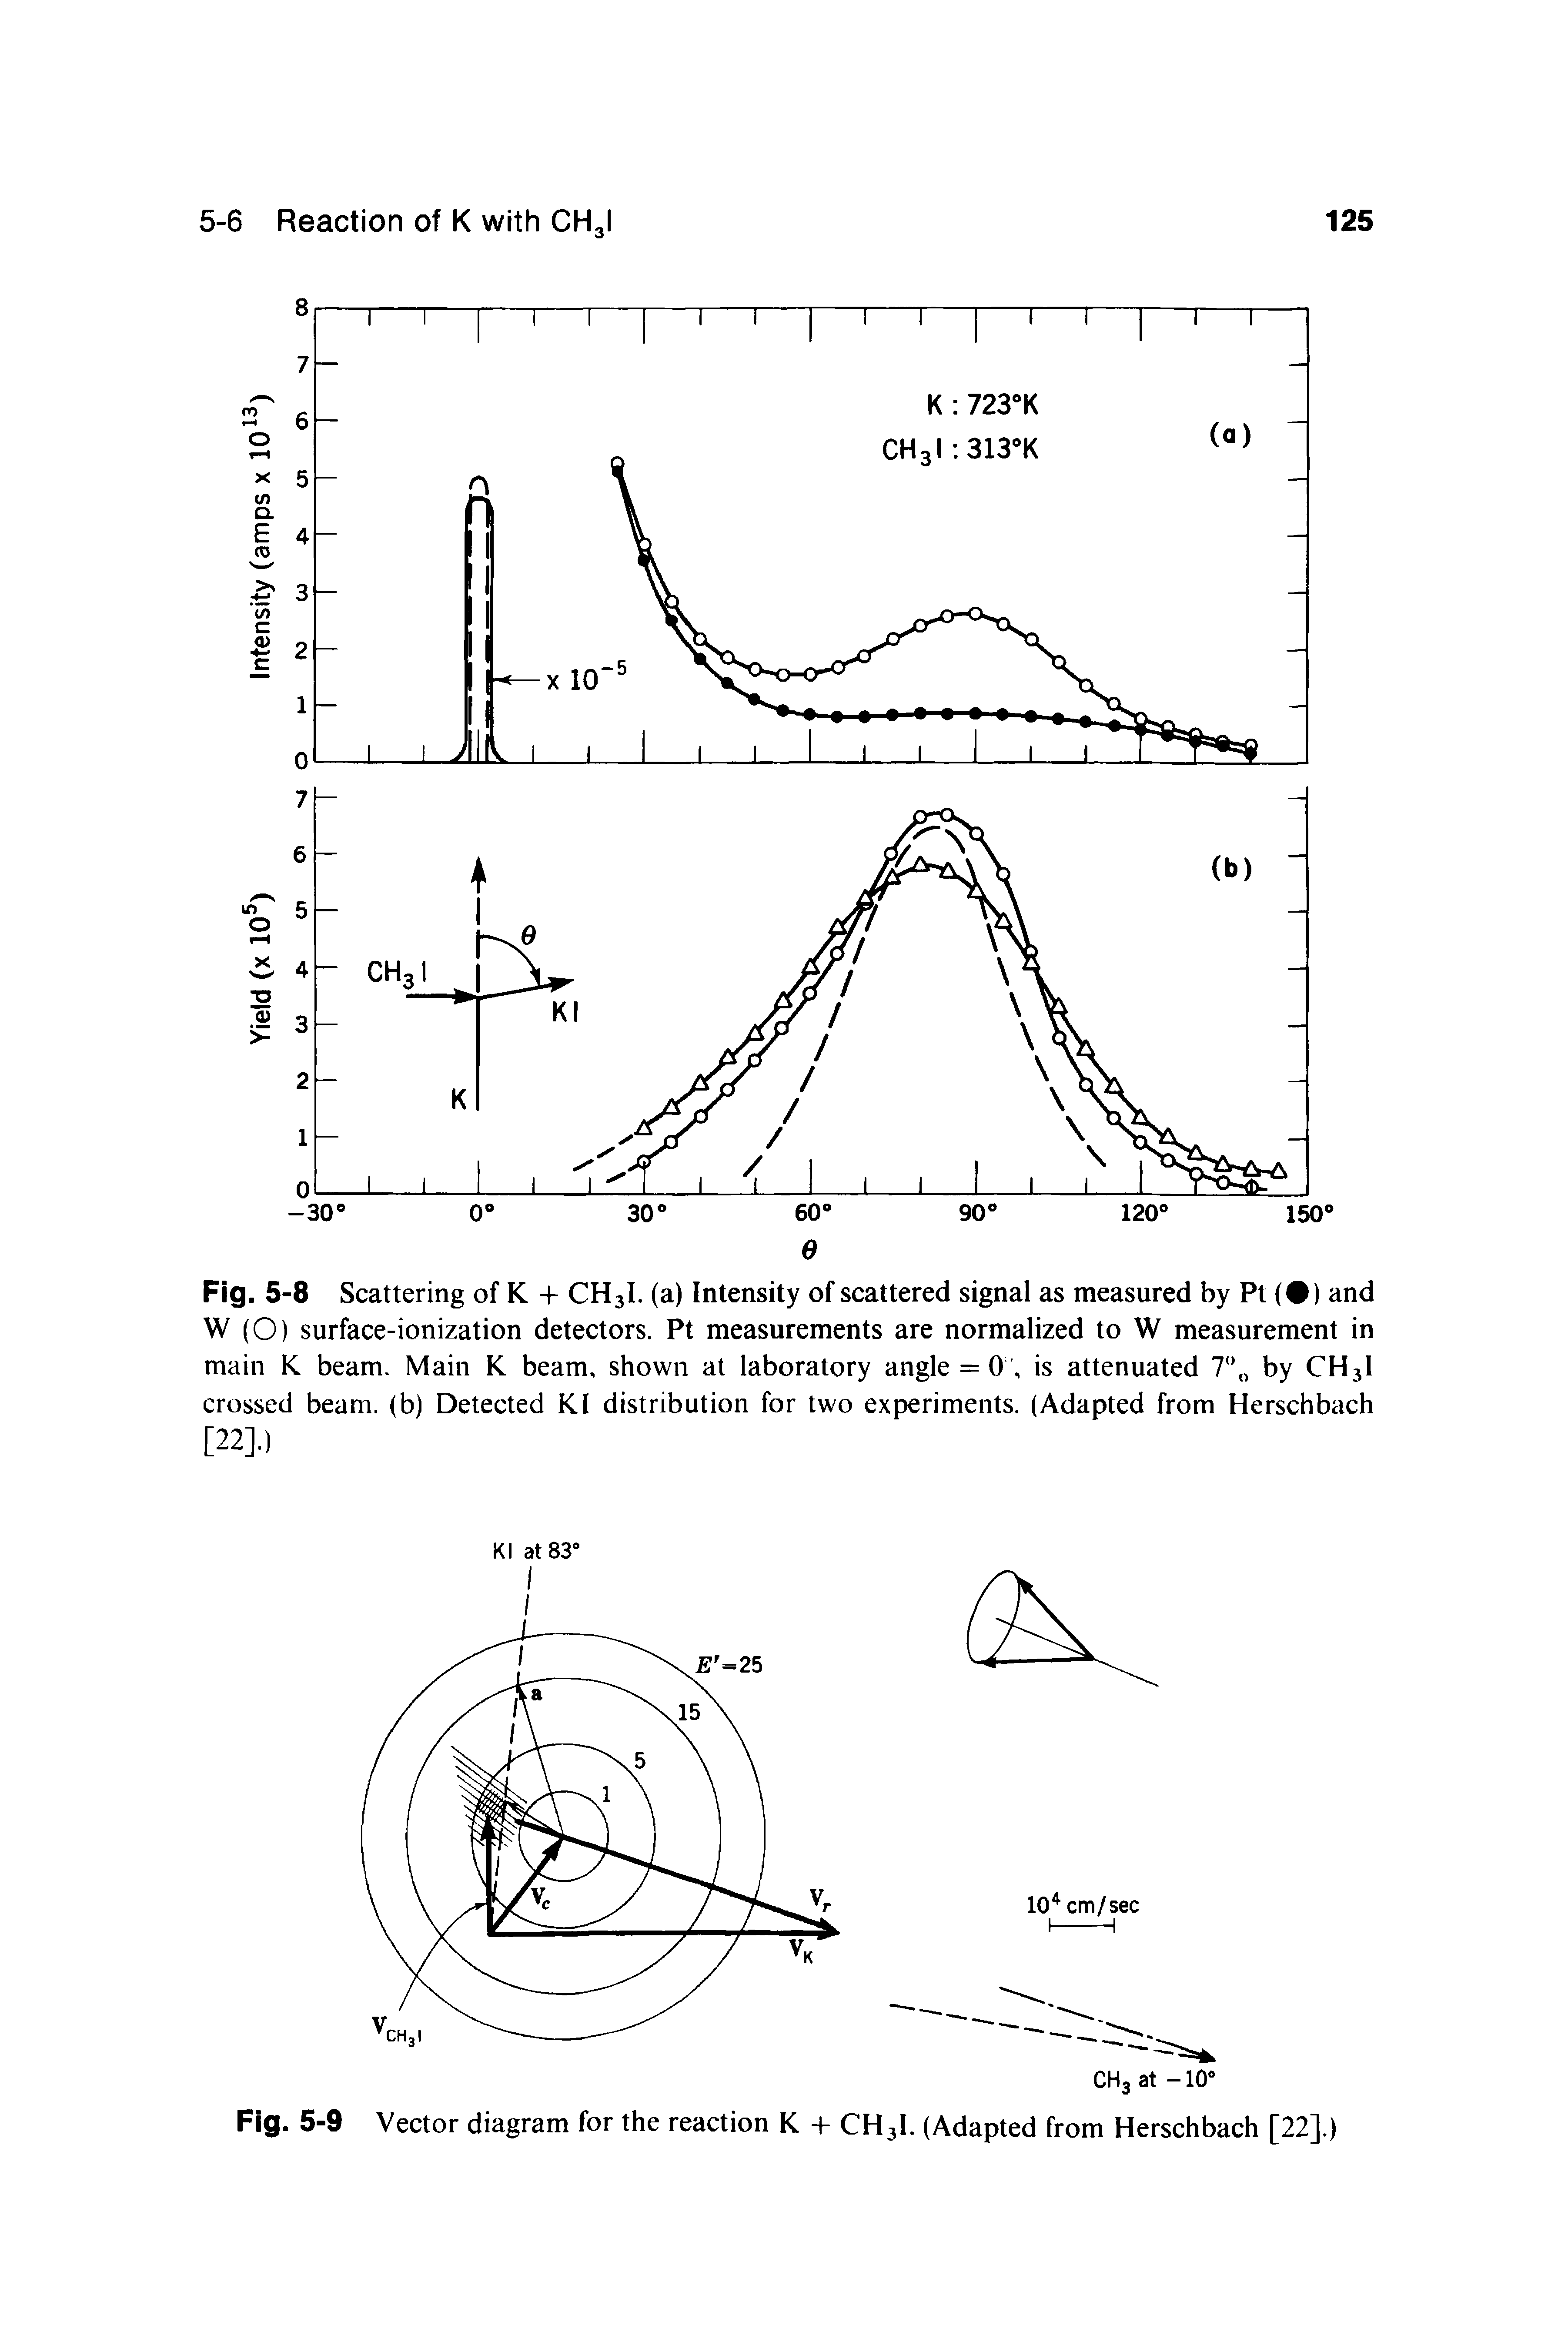 Fig. 5-8 Scattering of K -I- CH3I. (a) Intensity of scattered signal as measured by Pt ( ) and W (O) surface-ionization detectors. Pt measurements are normalized to W measurement in main K beam. Main K beam, shown at laboratory angle = 0, is attenuated by CH3I crossed beam, (b) Detected KI distribution for two experiments. (Adapted from Herschbach [22].)...